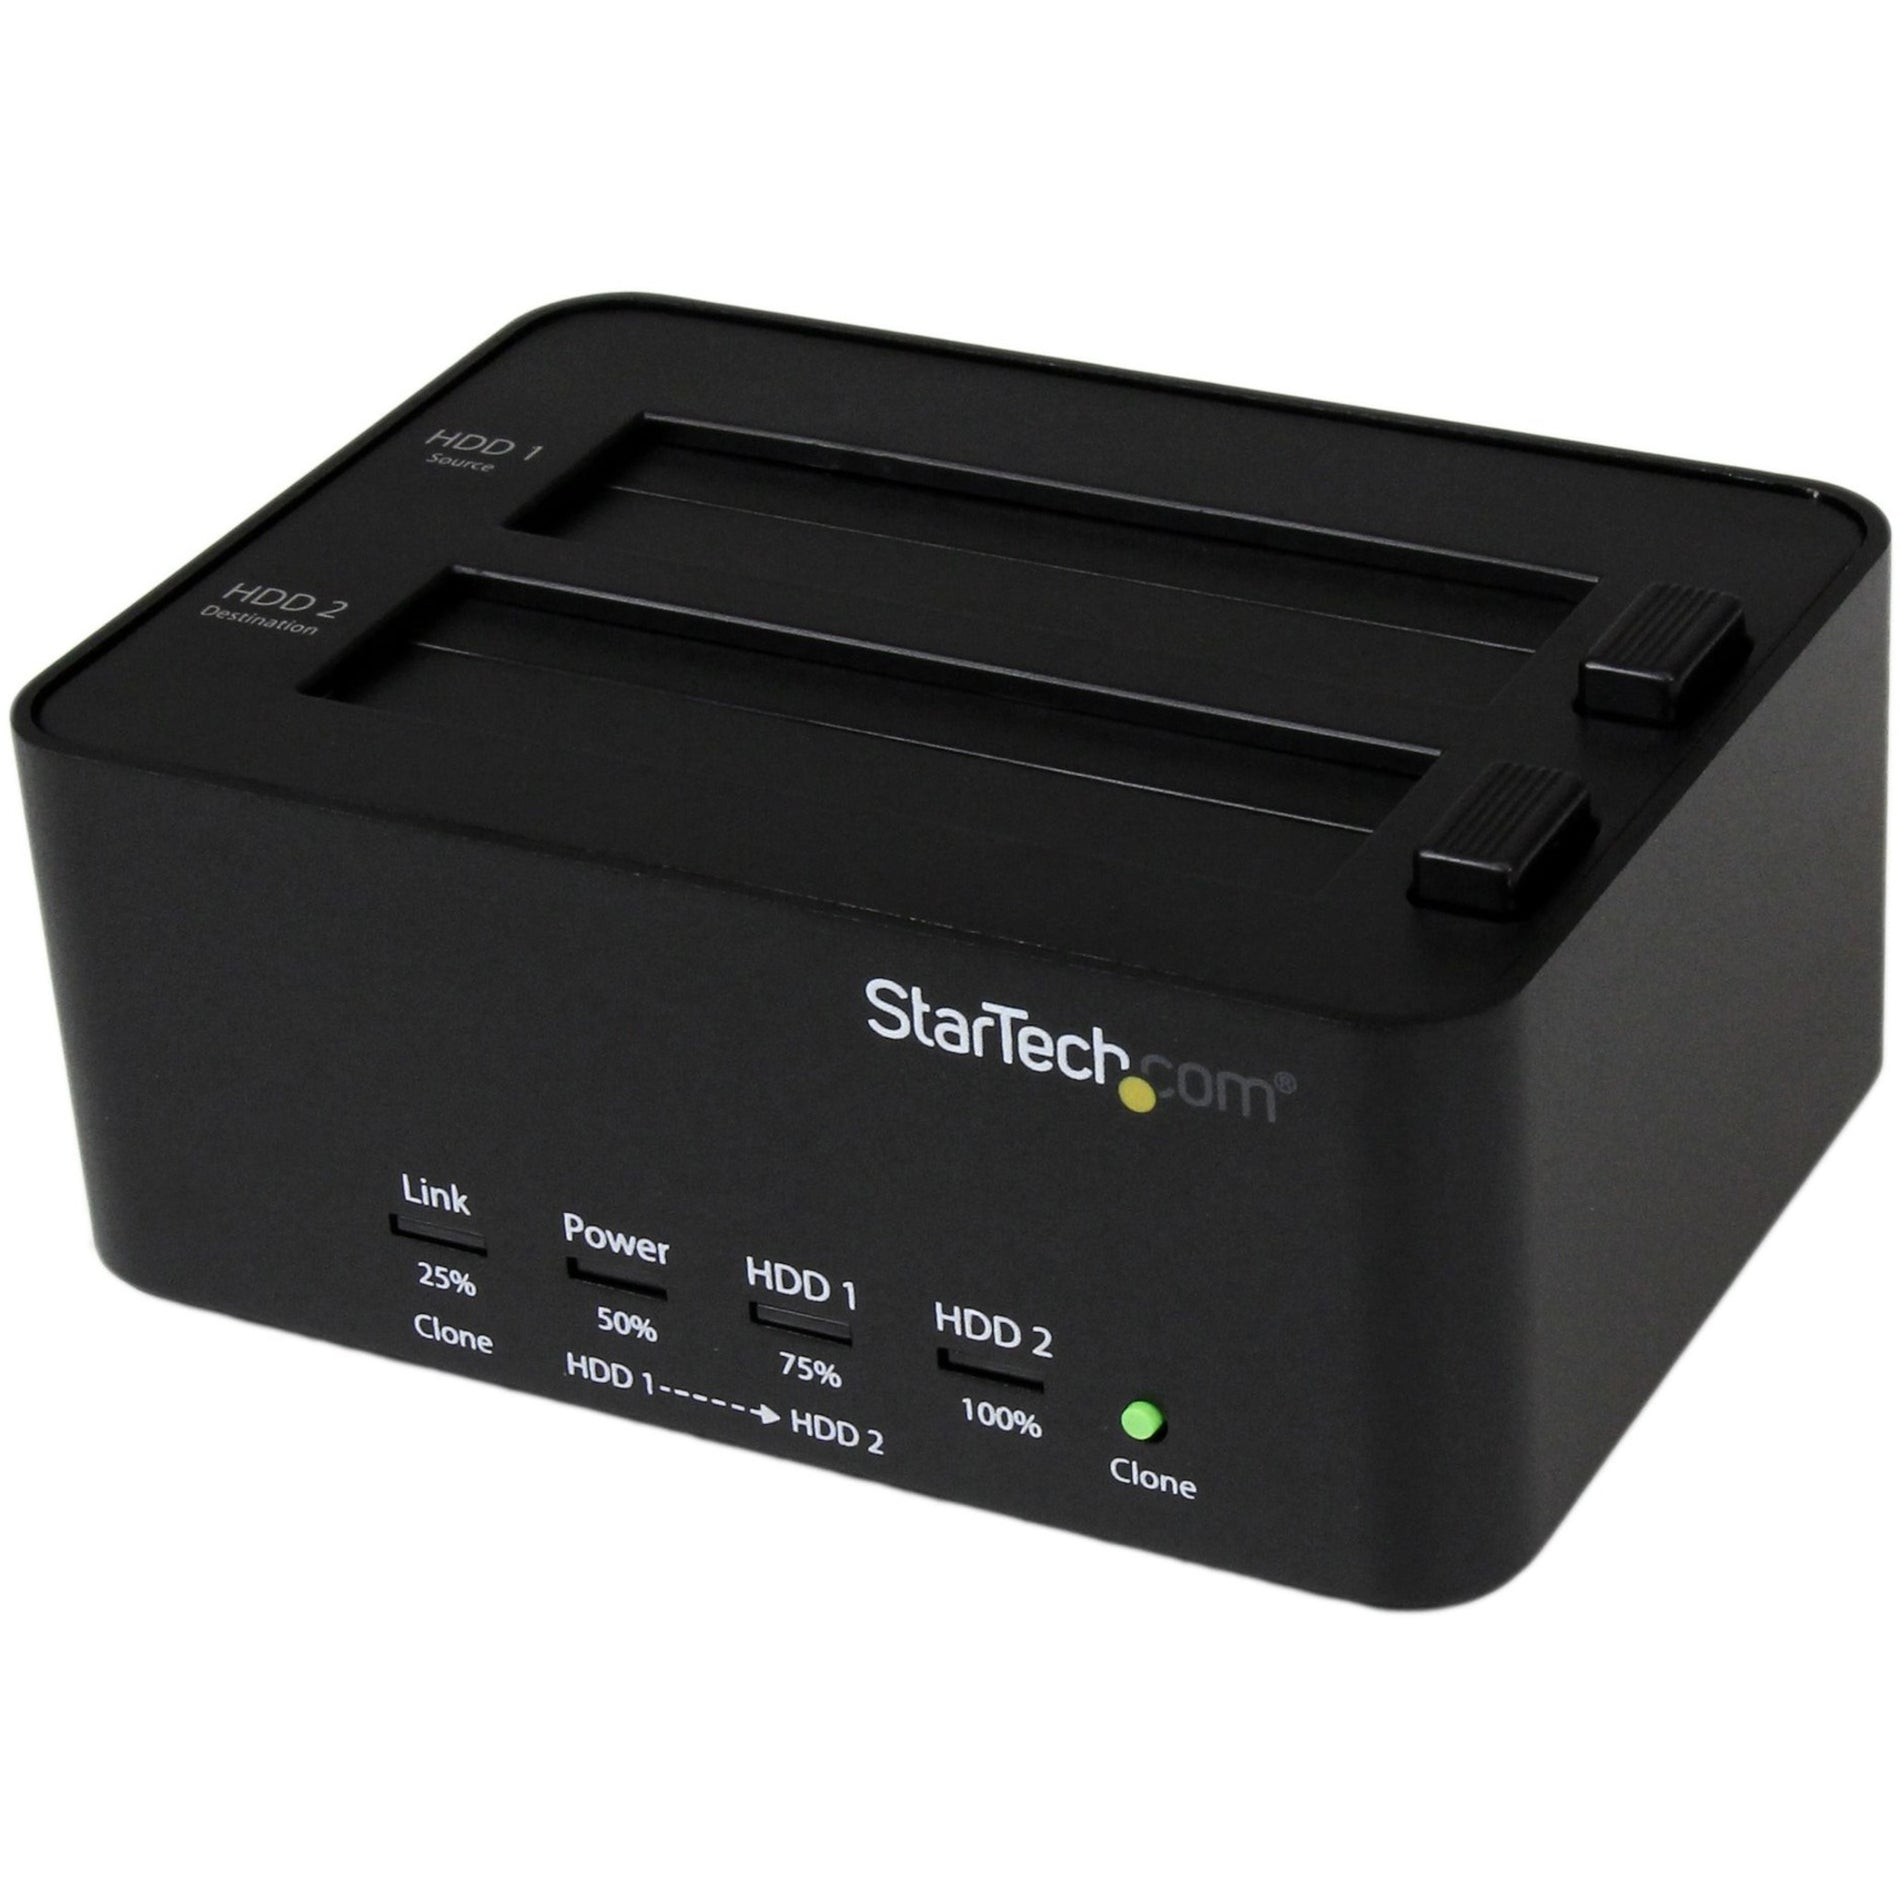 StarTech.com SATDOCK2REU3 Hard Drive/Solid State Drive Duplicator USB 3.0 to 2.5/3.5in SATA Docking Station and Standalone HDD/SSD Duplicator